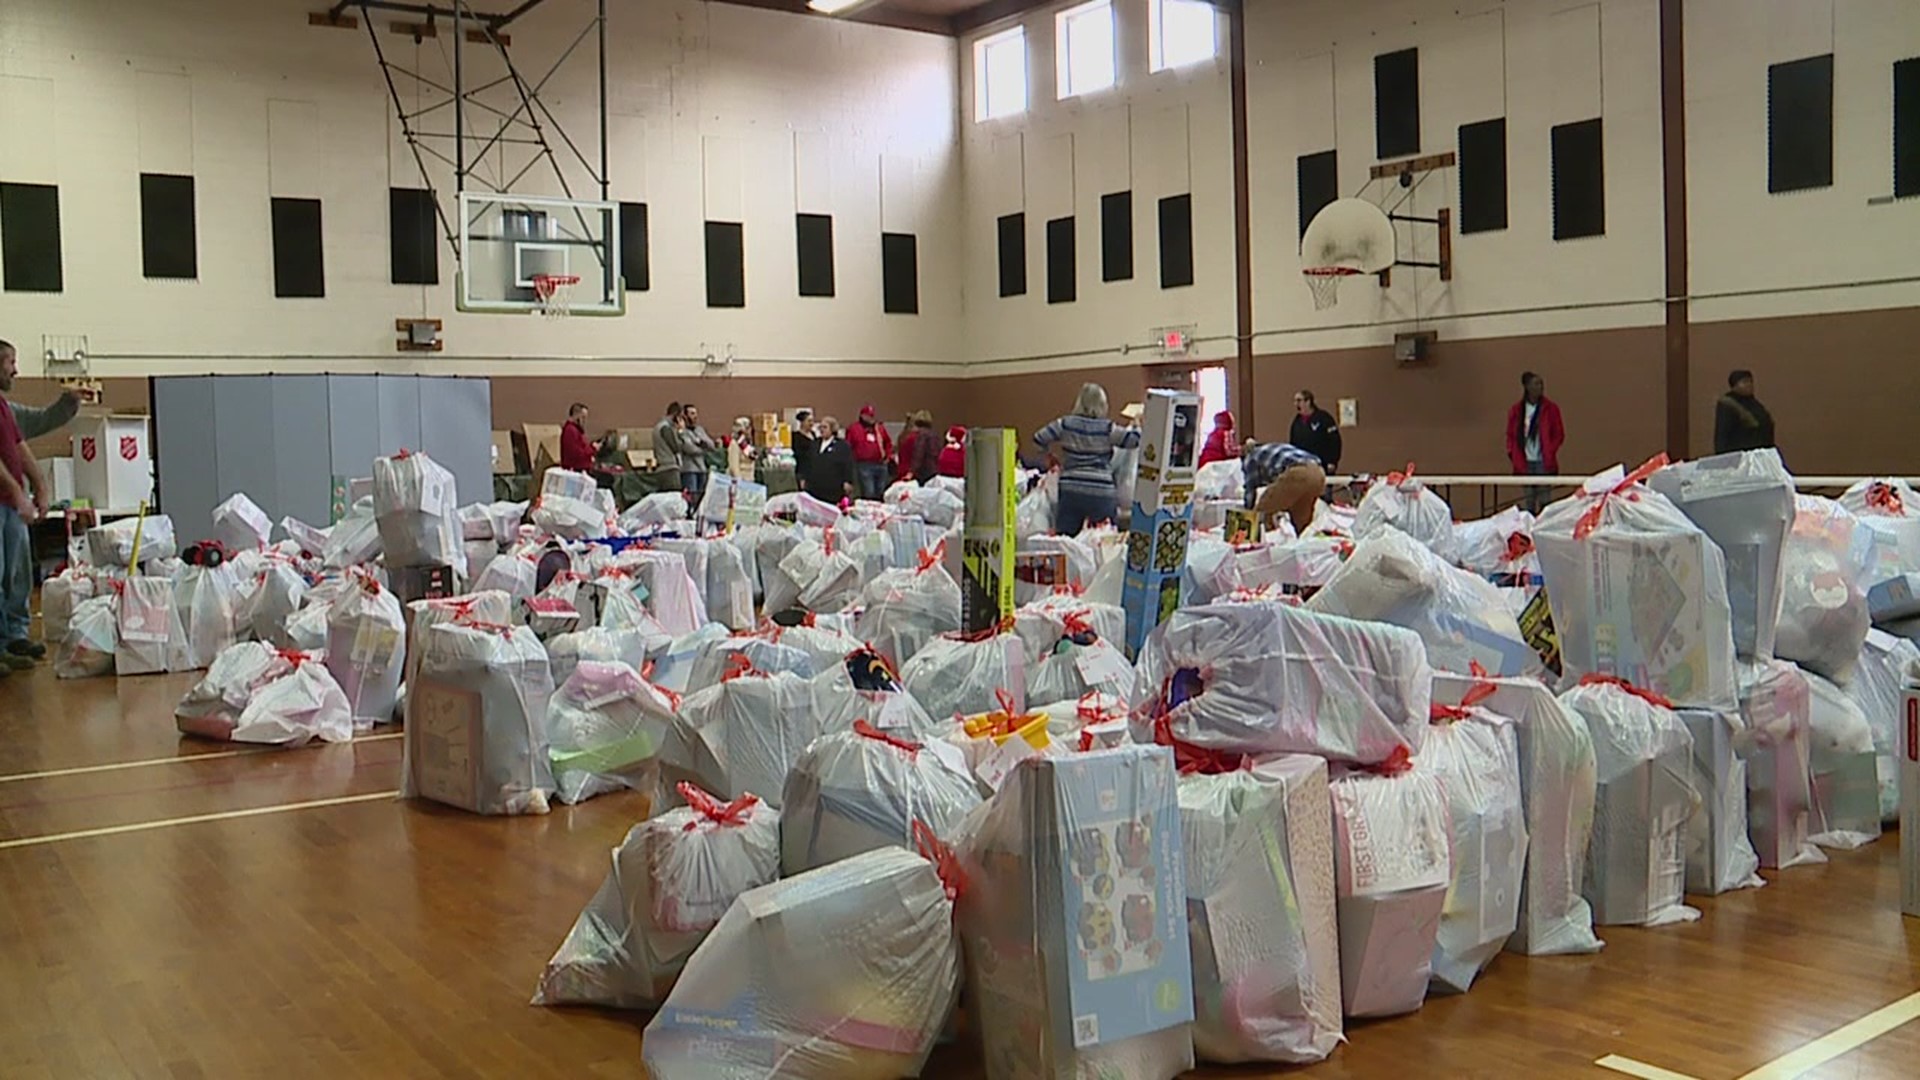 More than 400 families received toys through the distribution.